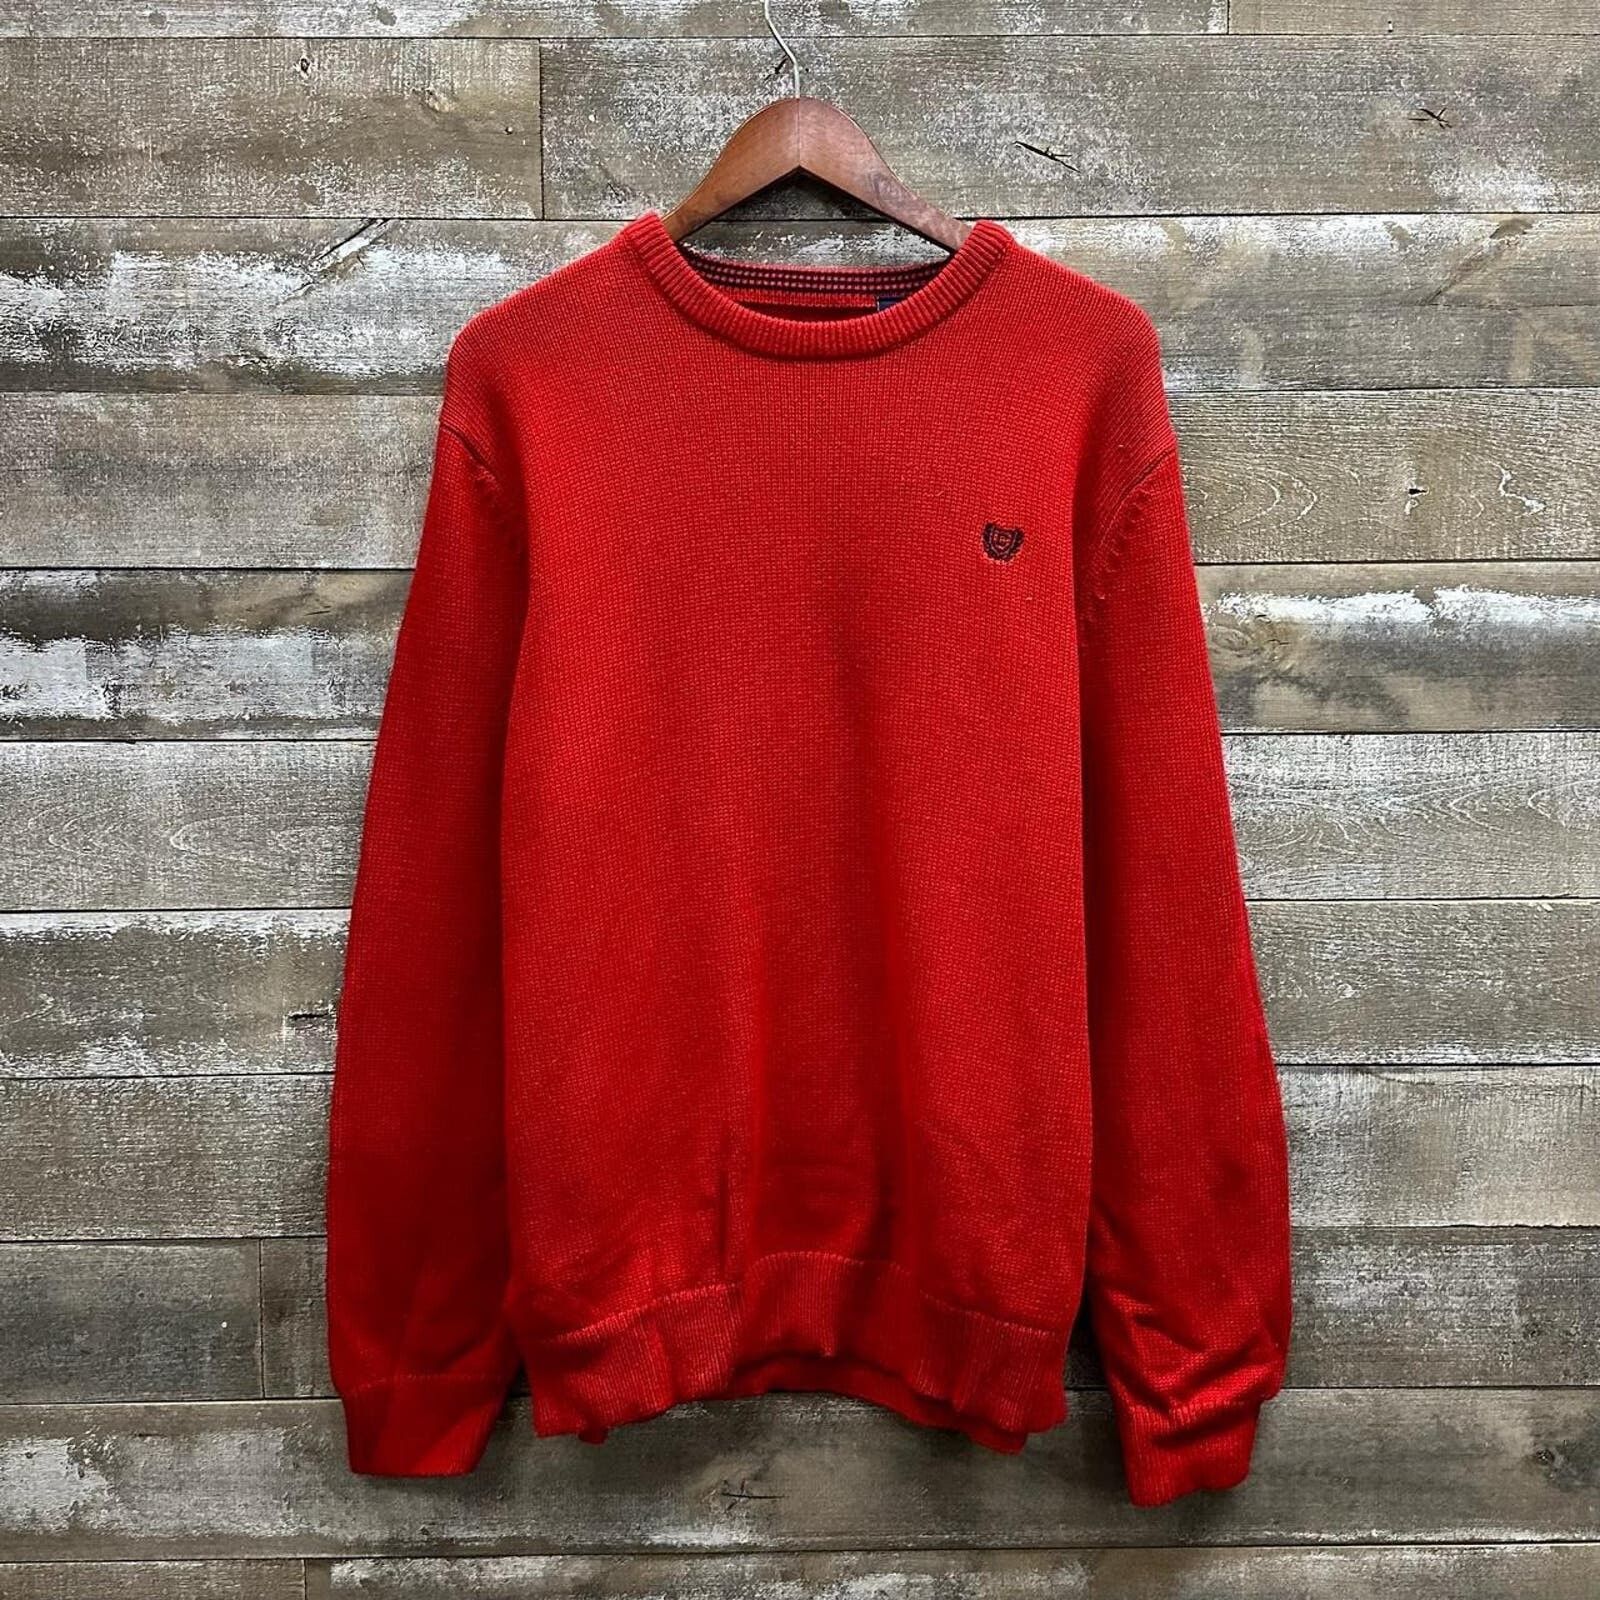 Chaps Vintage 1990’s Chaps Red Knitted Crewneck Sweater Mens Large Size US L / EU 52-54 / 3 - 2 Preview